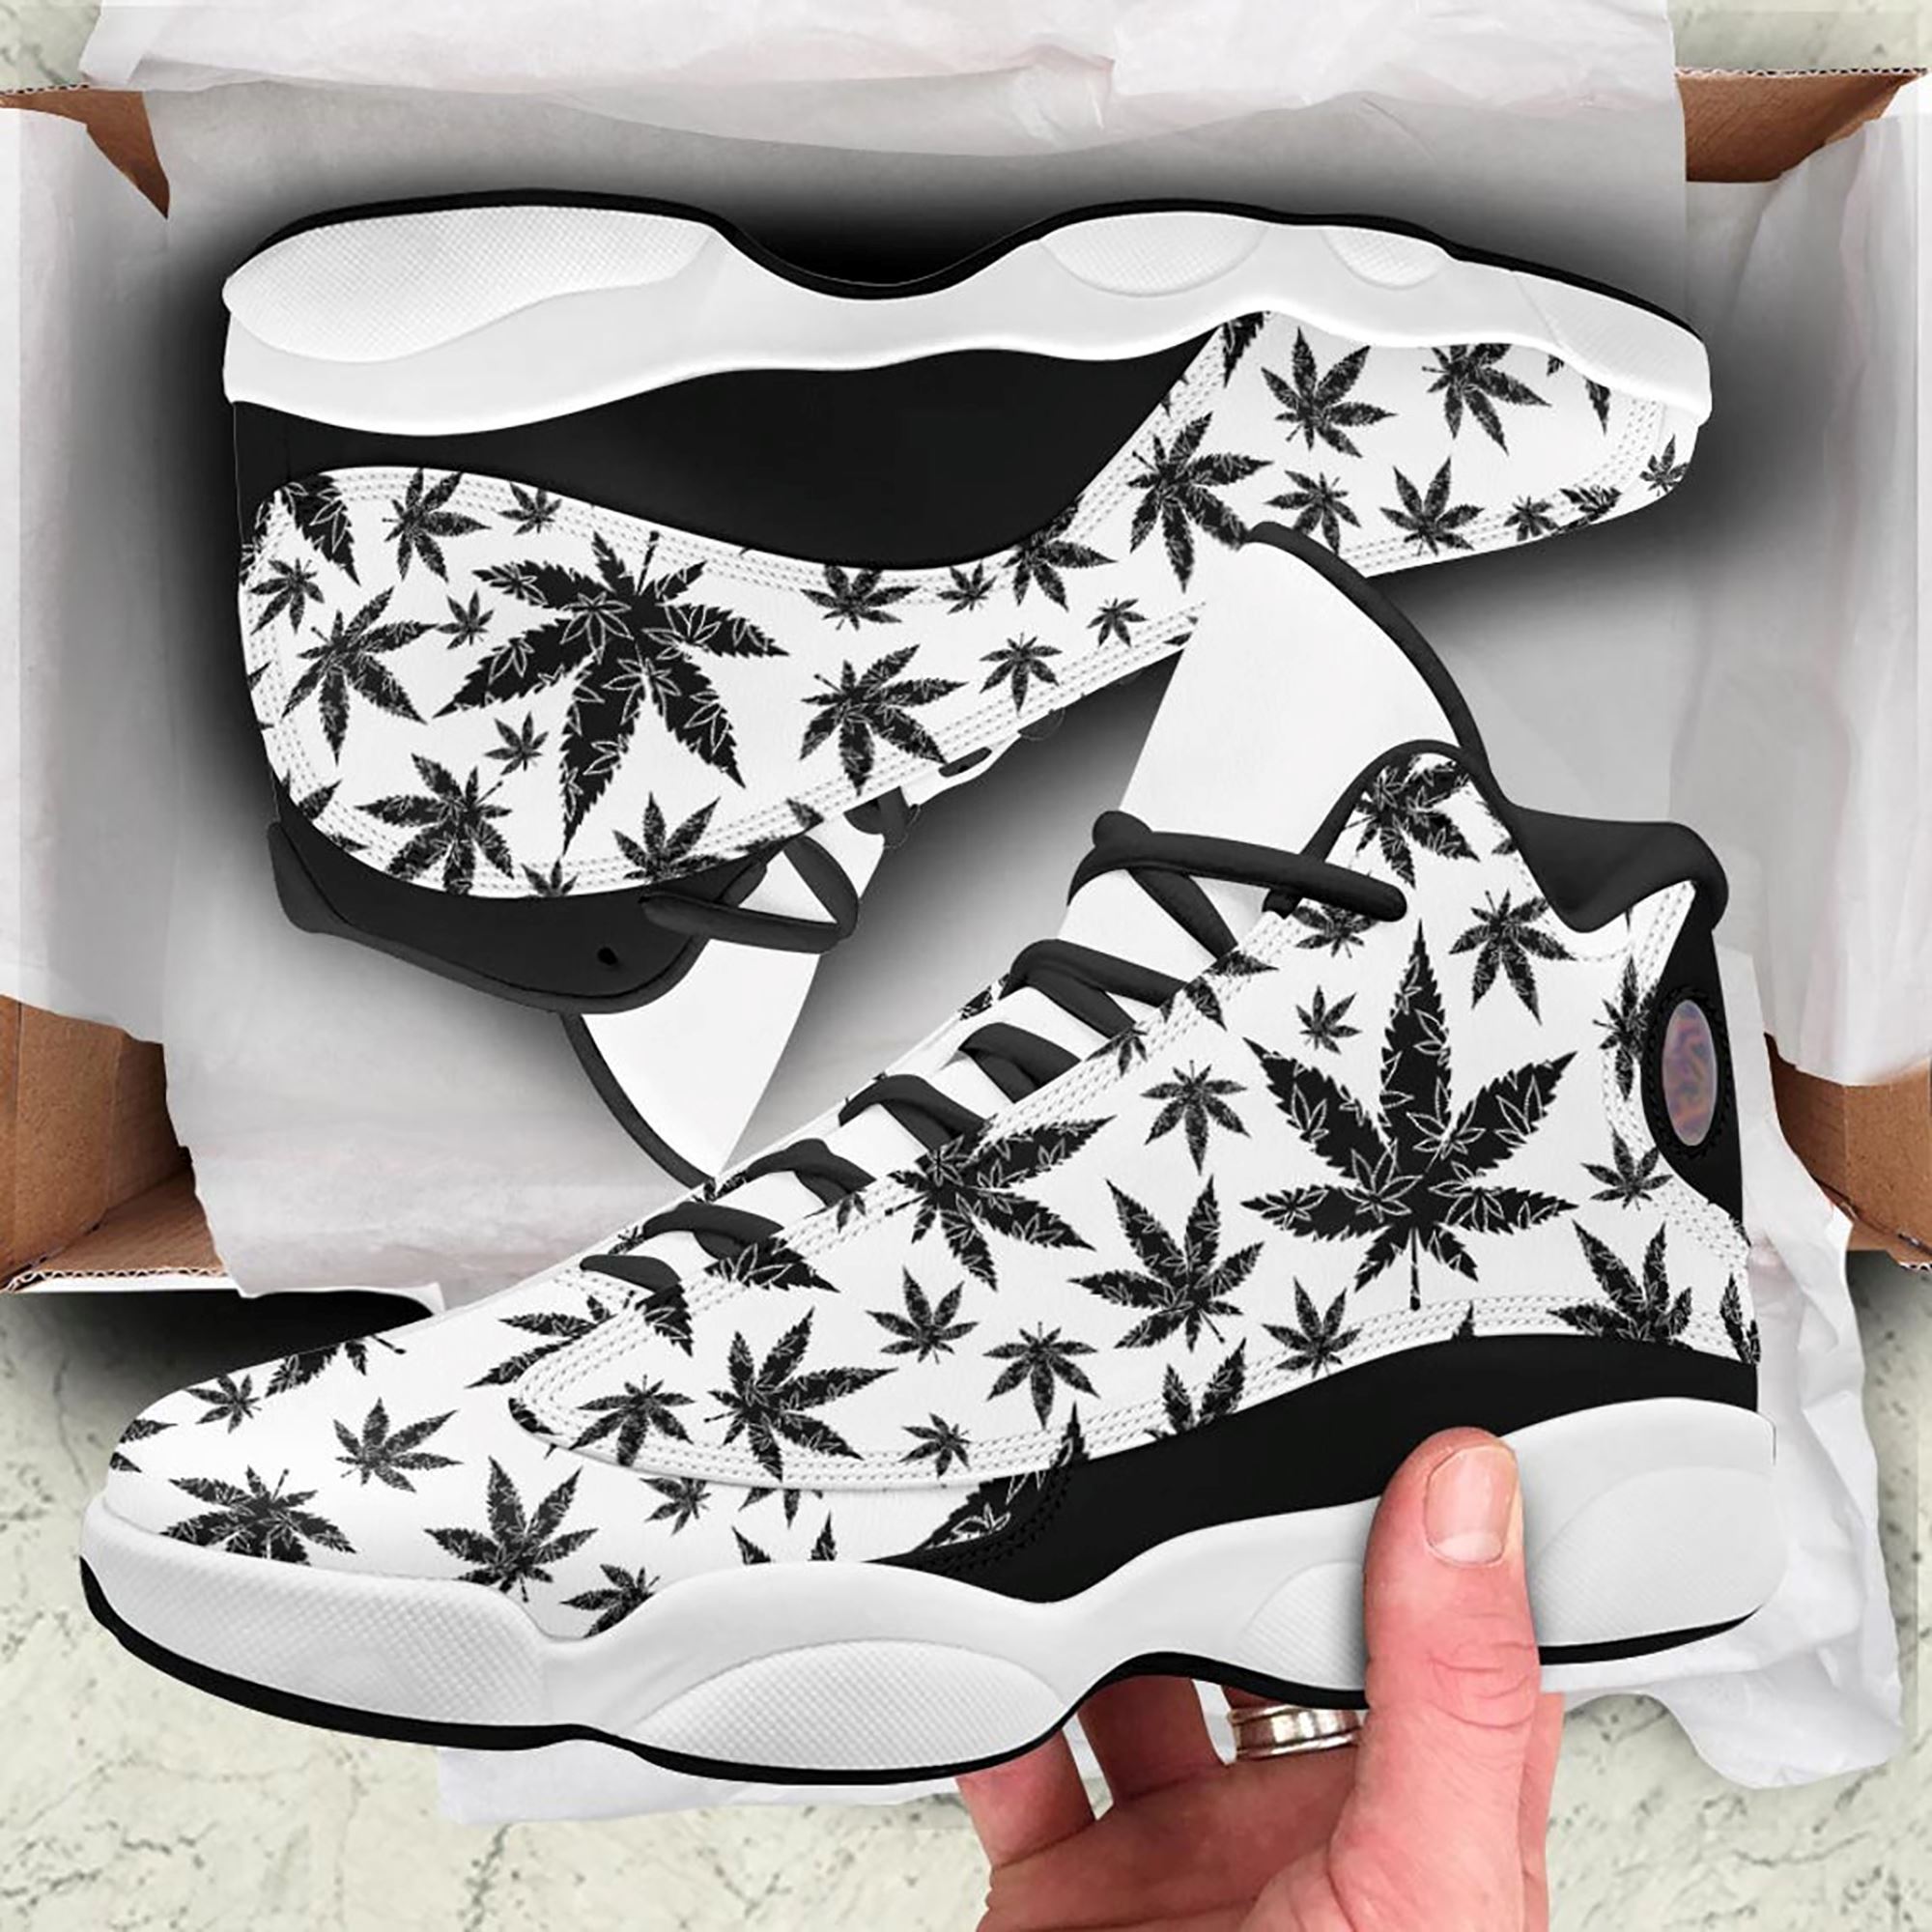 Dark Cannabis Weed Air Jordan 13 Sneakers Shoes For Men And Women Air Jd13 Shoes Cannabis Psychedelic Marijuana Lover